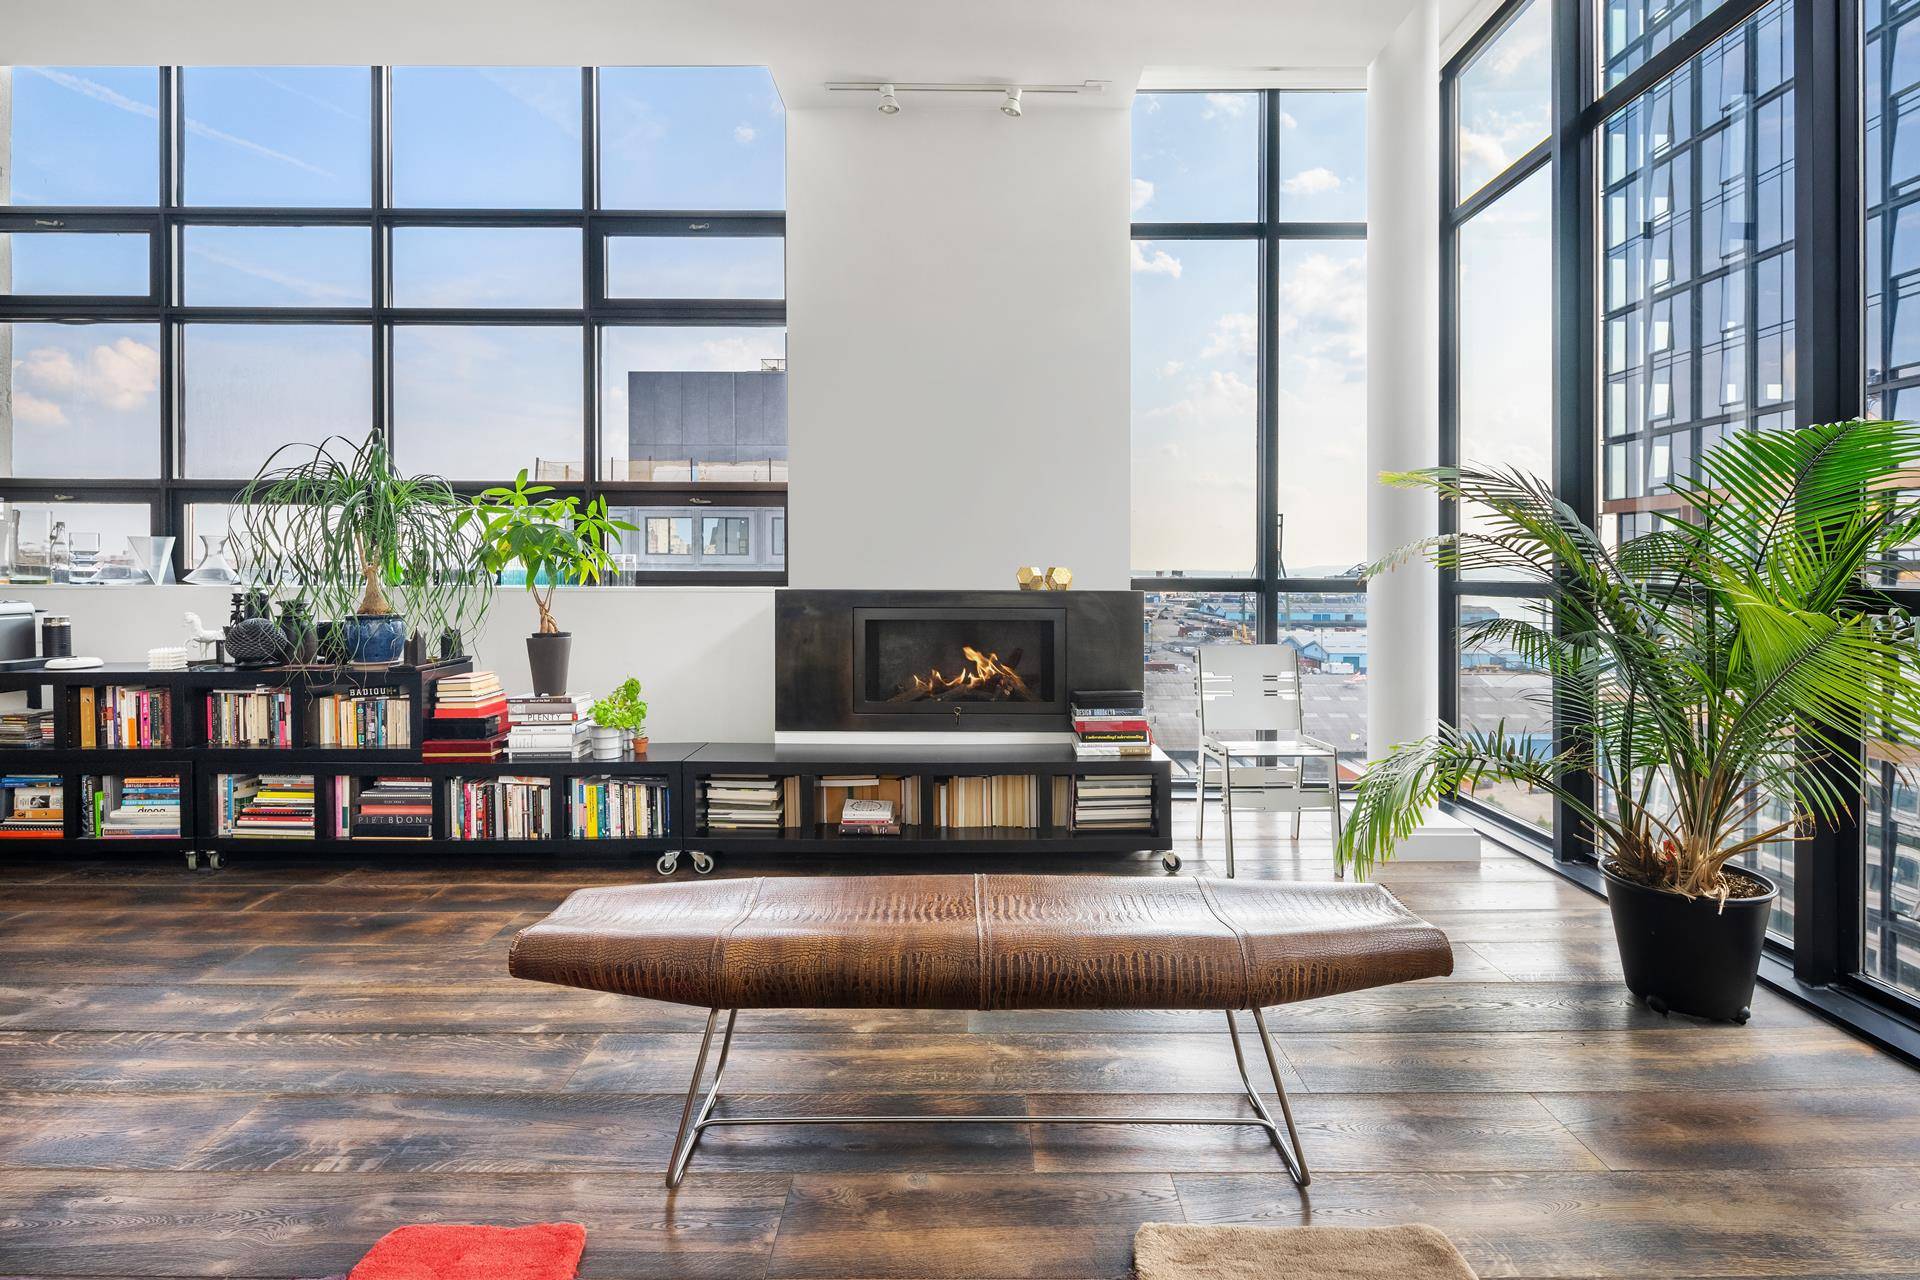 ARCHITECTURAL LUXURY IN A WATERFRONT PARK This meticulously and unconventionally designed loft with floor to ceiling glass overlooking the East River, fuses cutting edge style with sophistication and architectural detail ...